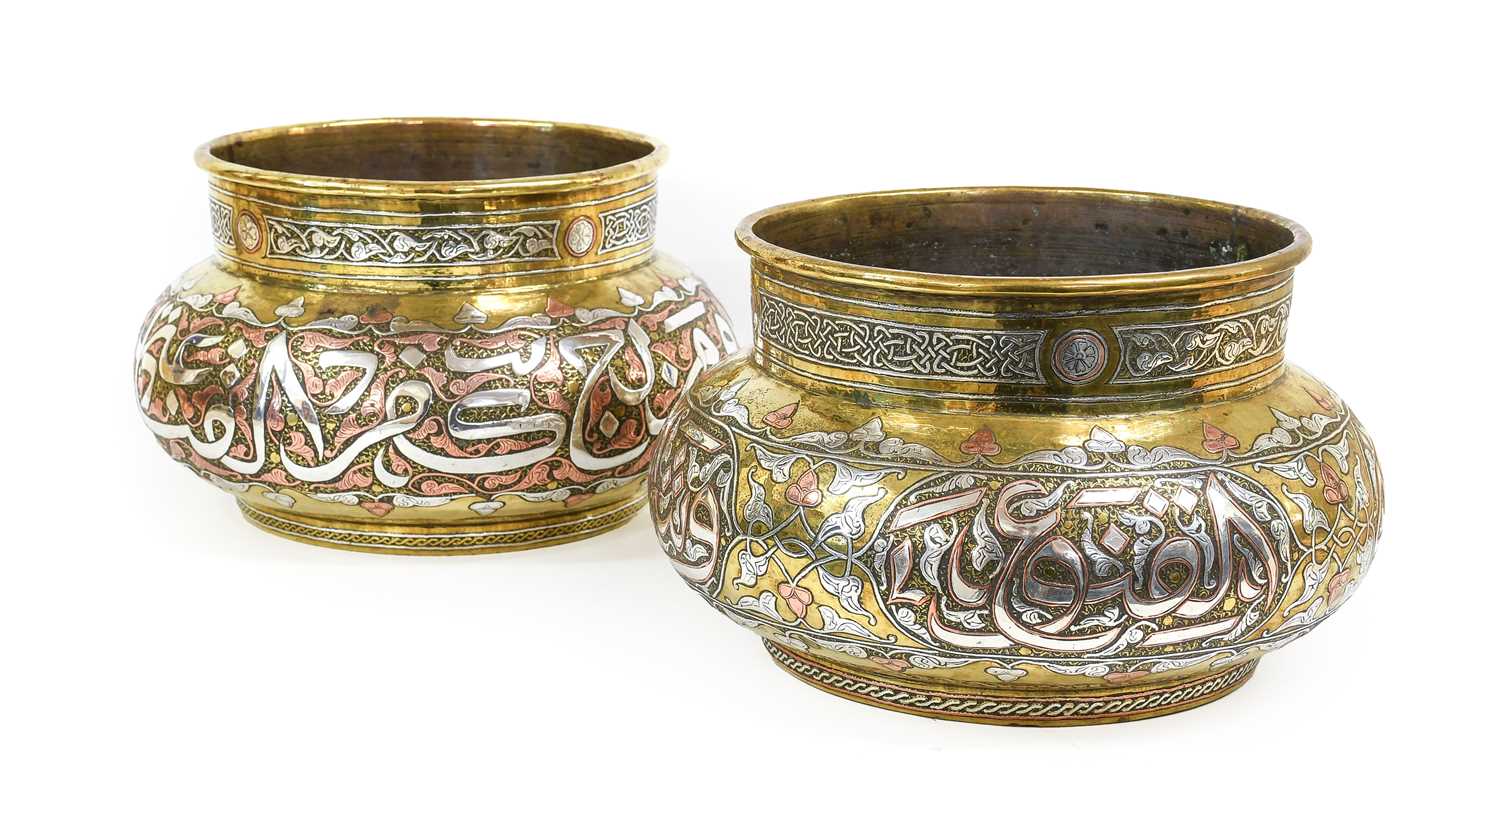 A Pair of Cairoware Bowls, late 19th/20th century, of compressed oval form with cylindrical neck,